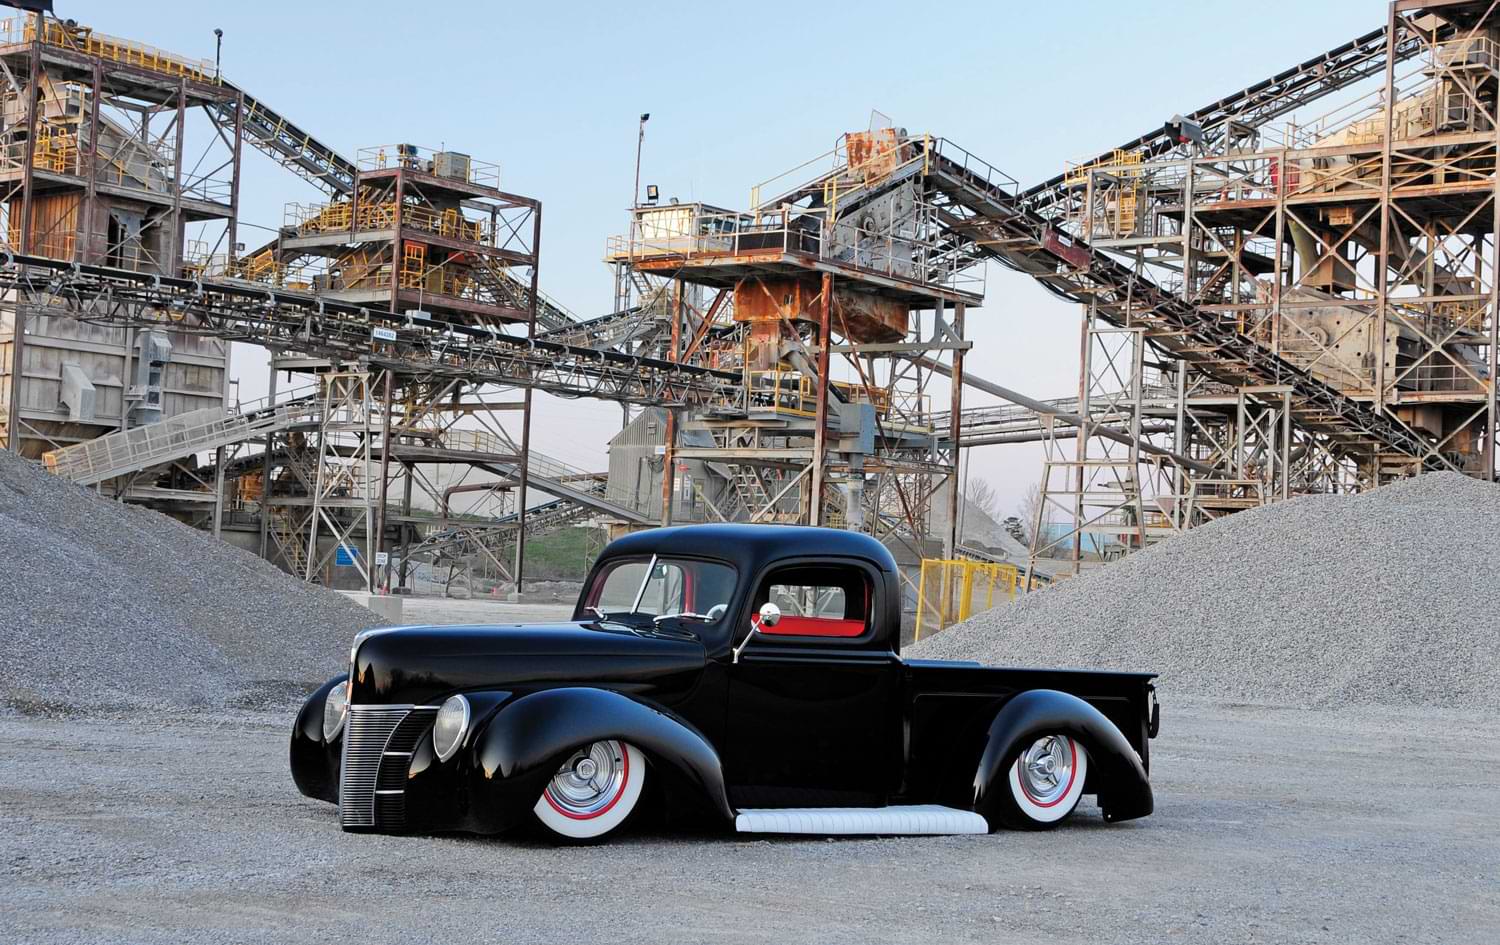 ’40 Ford pickup truck side